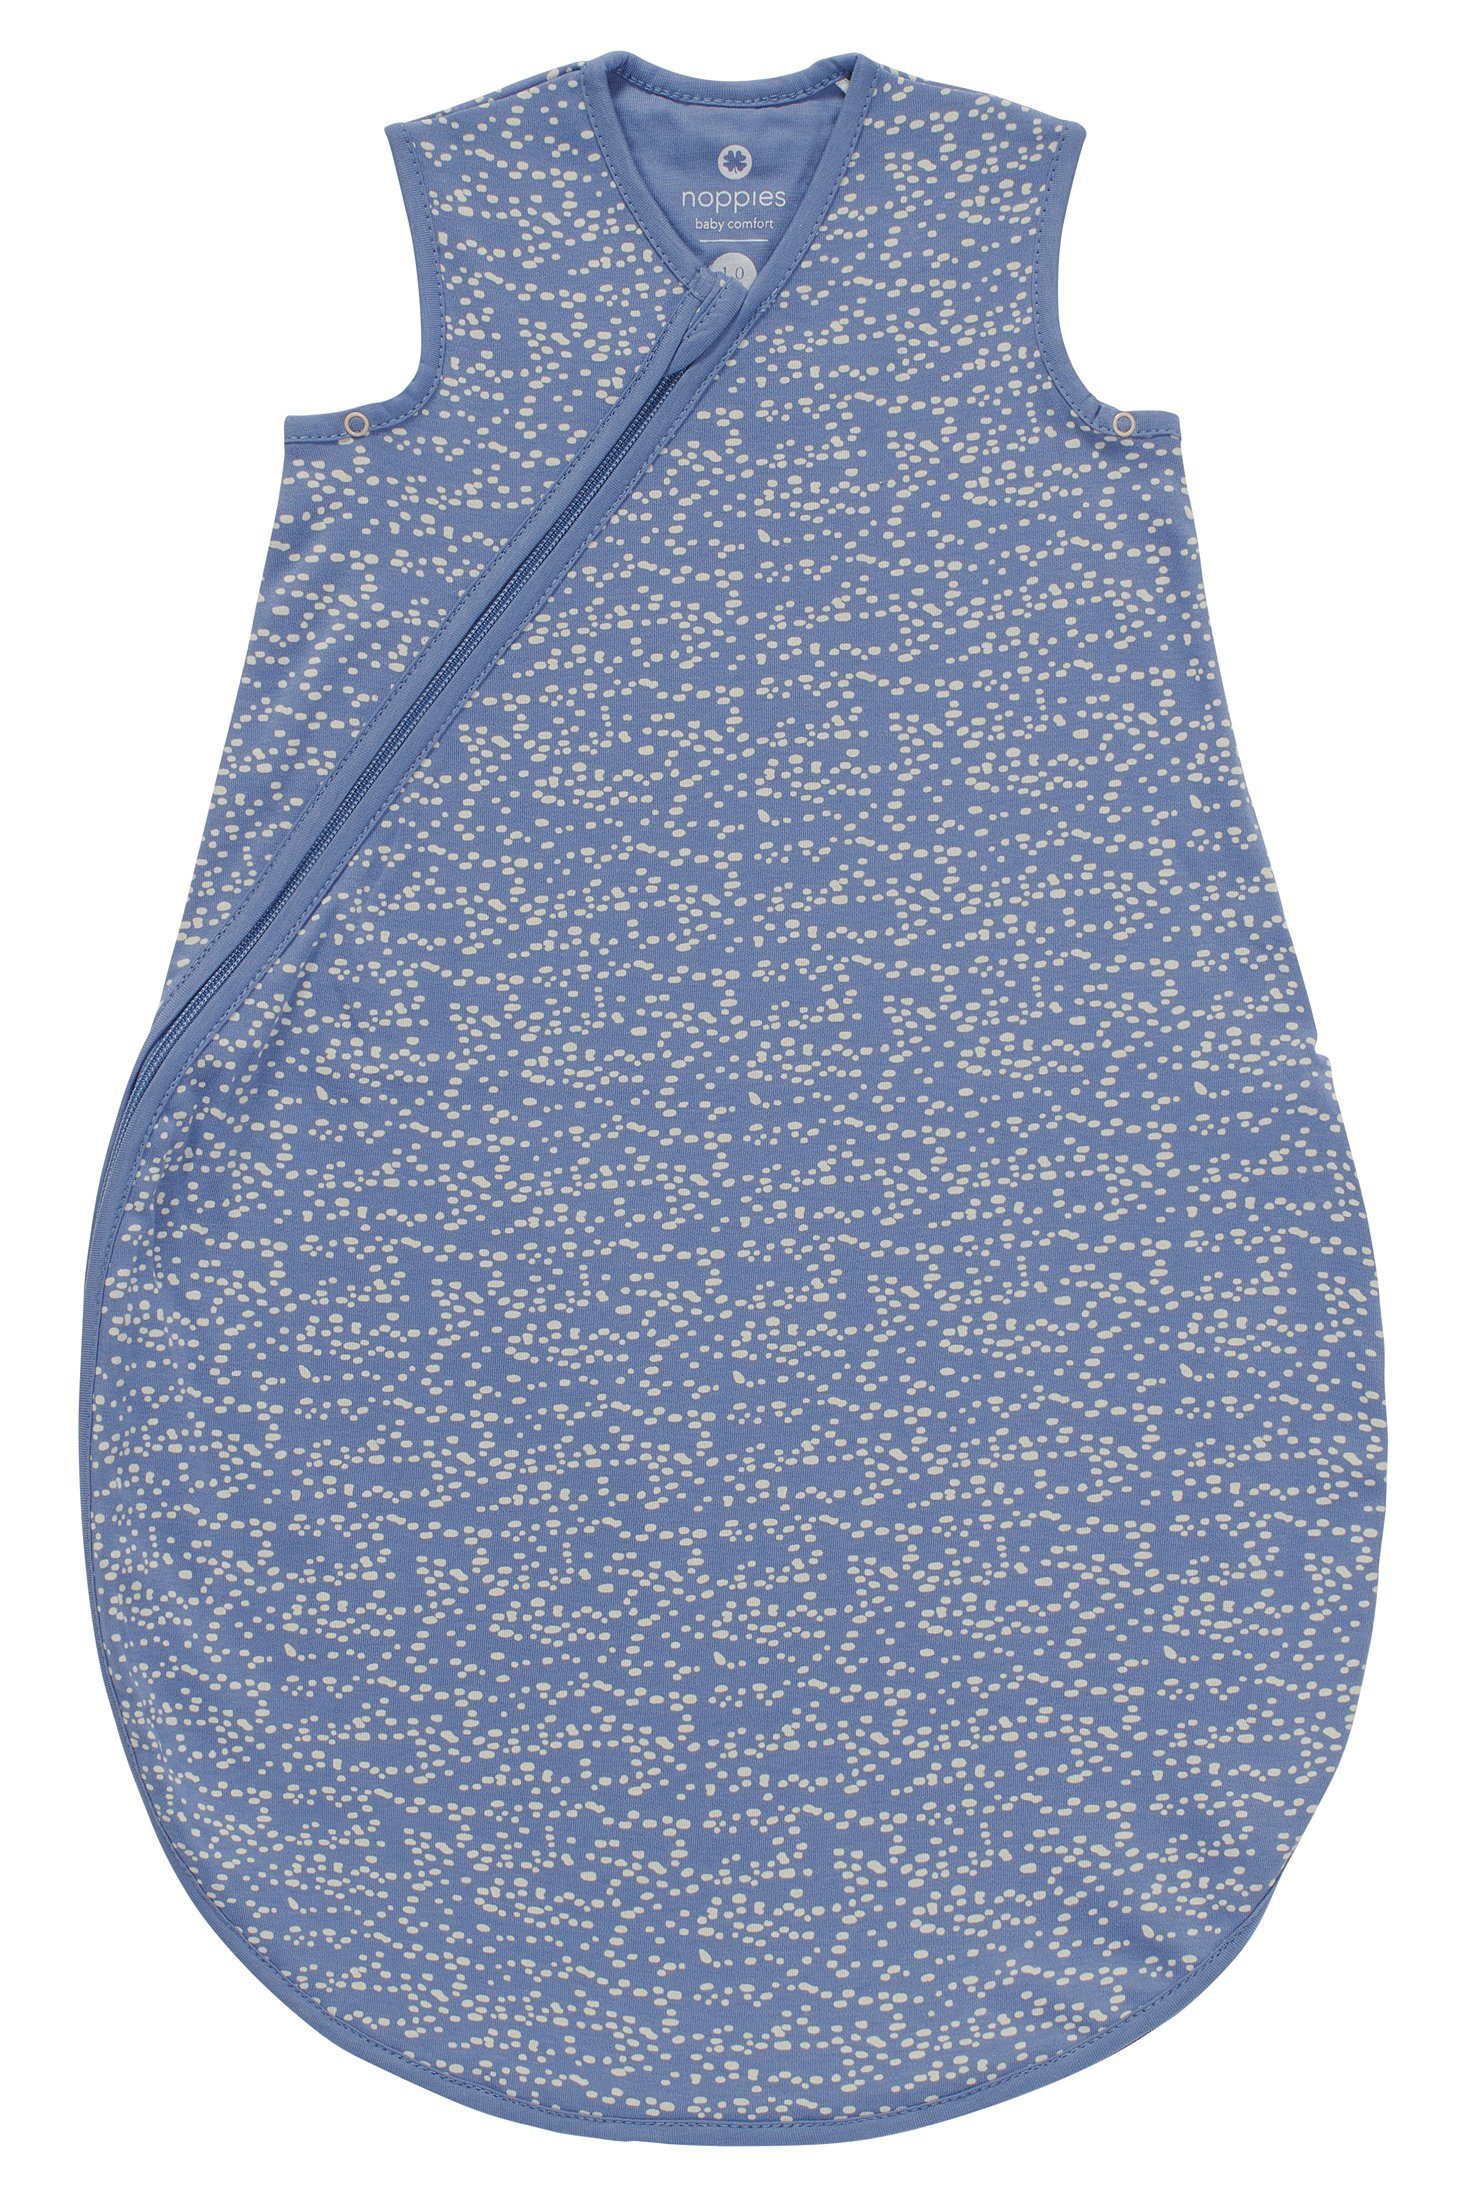 Noppies Babyschlafsack (1 tlg) Fancy Blue Sommerschlafsack Colony Dot Baby Noppies